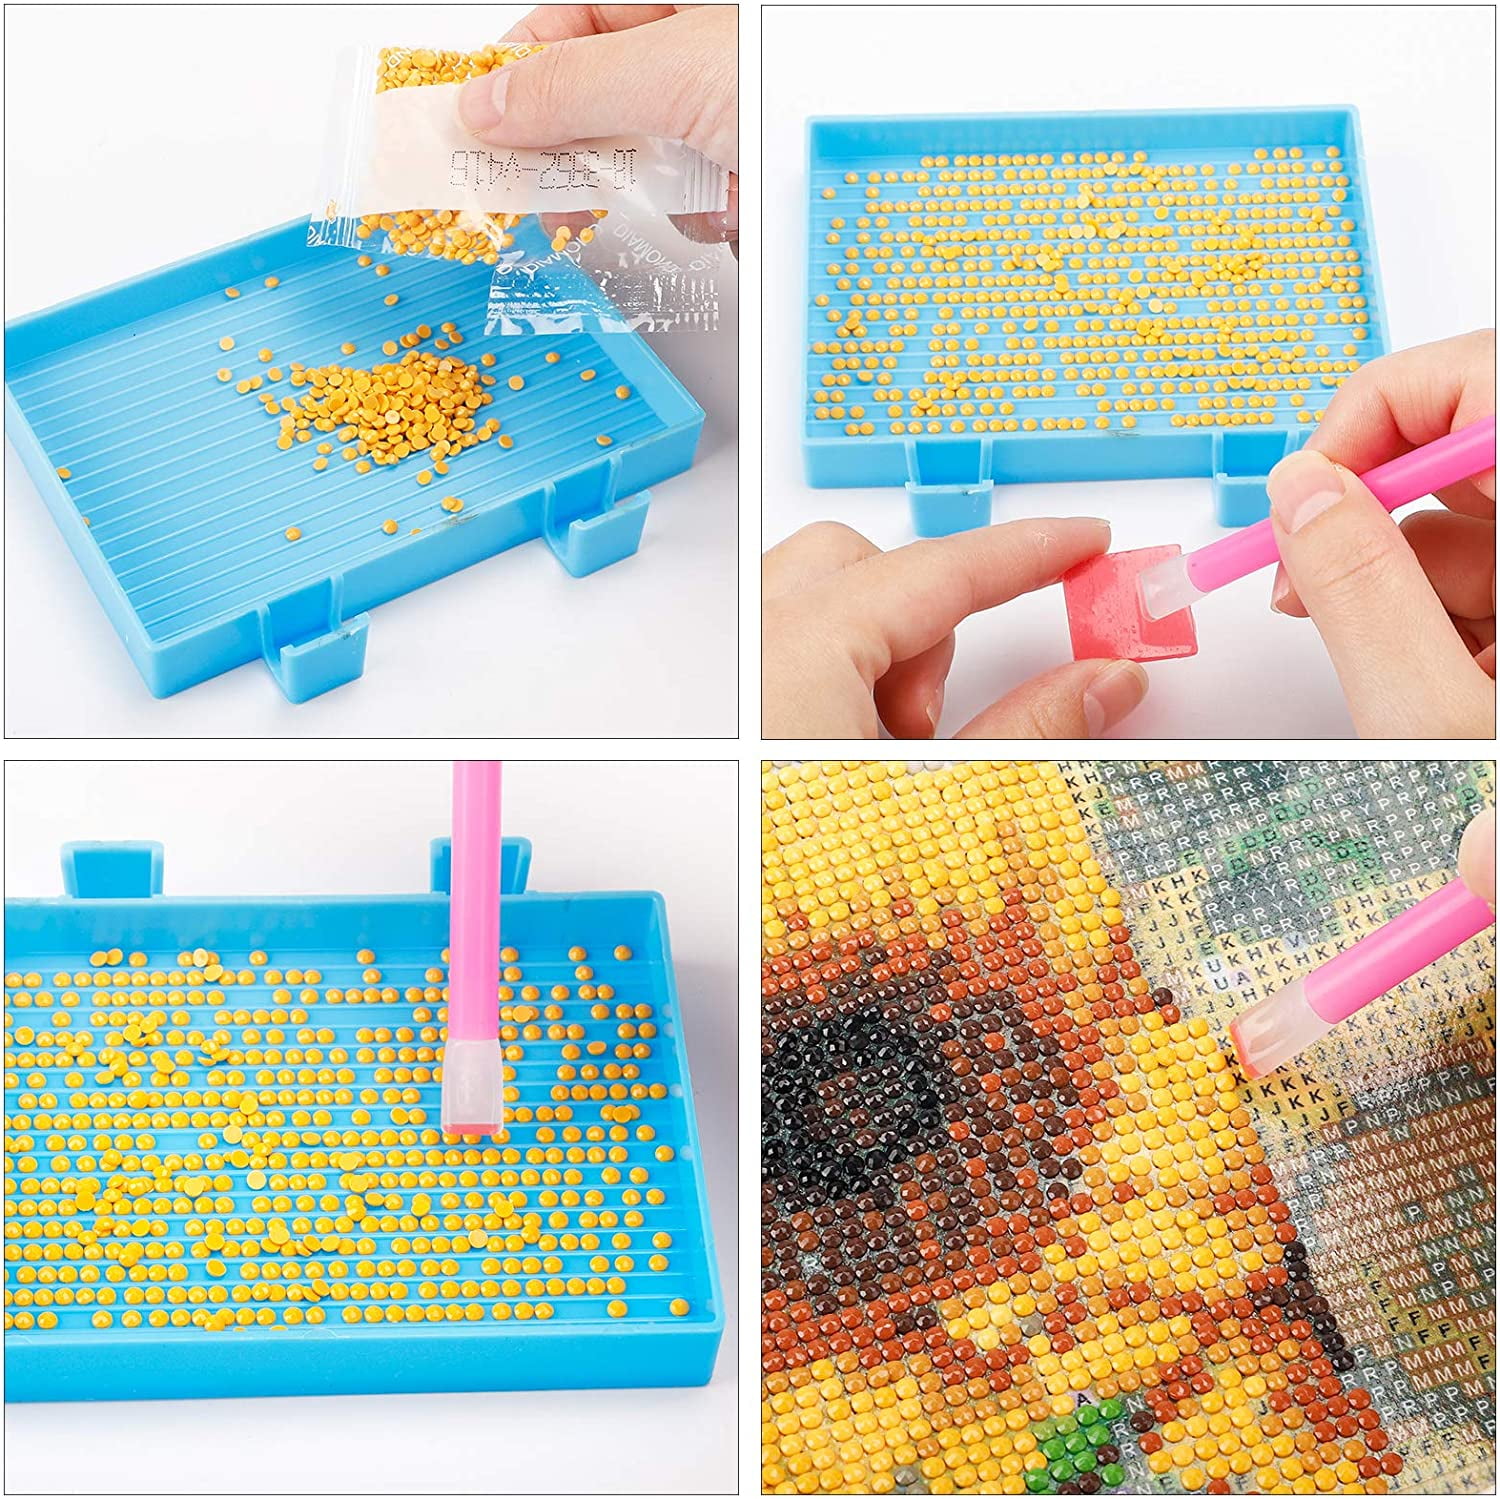 Cheers.US DIY Diamond Painting Accessories Diamond Painting Tools Cross  Stitch Tool Set with 3 x Diamond Painting Trays, 4 x Diamond Painting Pens, Diamond Embroidery Box and Stickers 